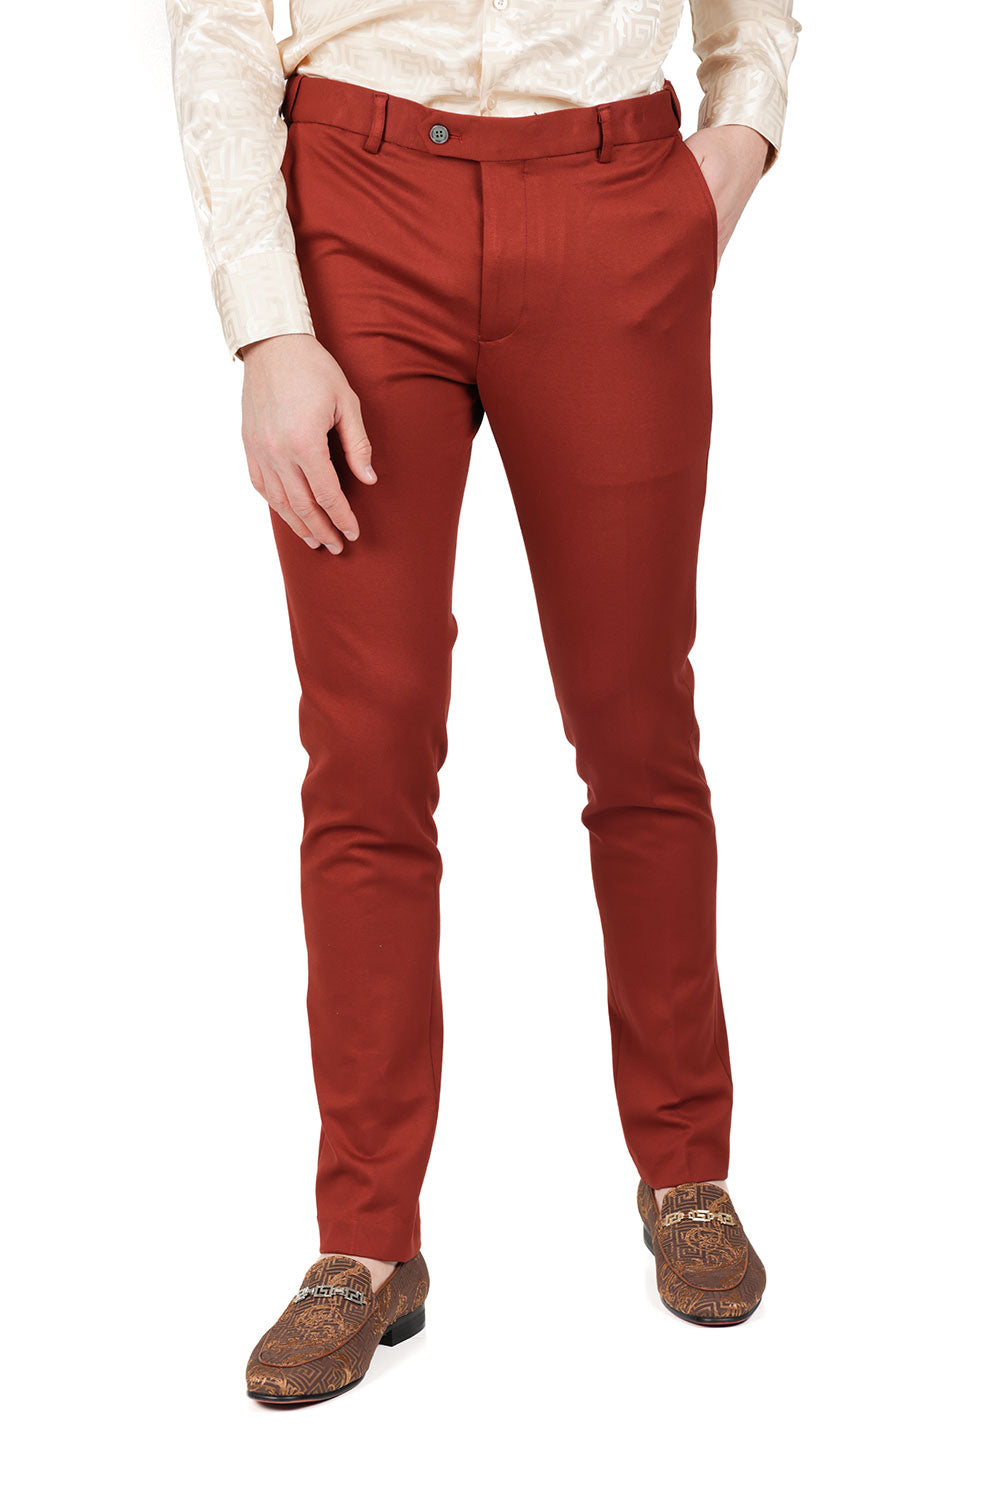 Barabas Men's Solid Color Essential Chino Dress Stretch Pants CP4007 Brick